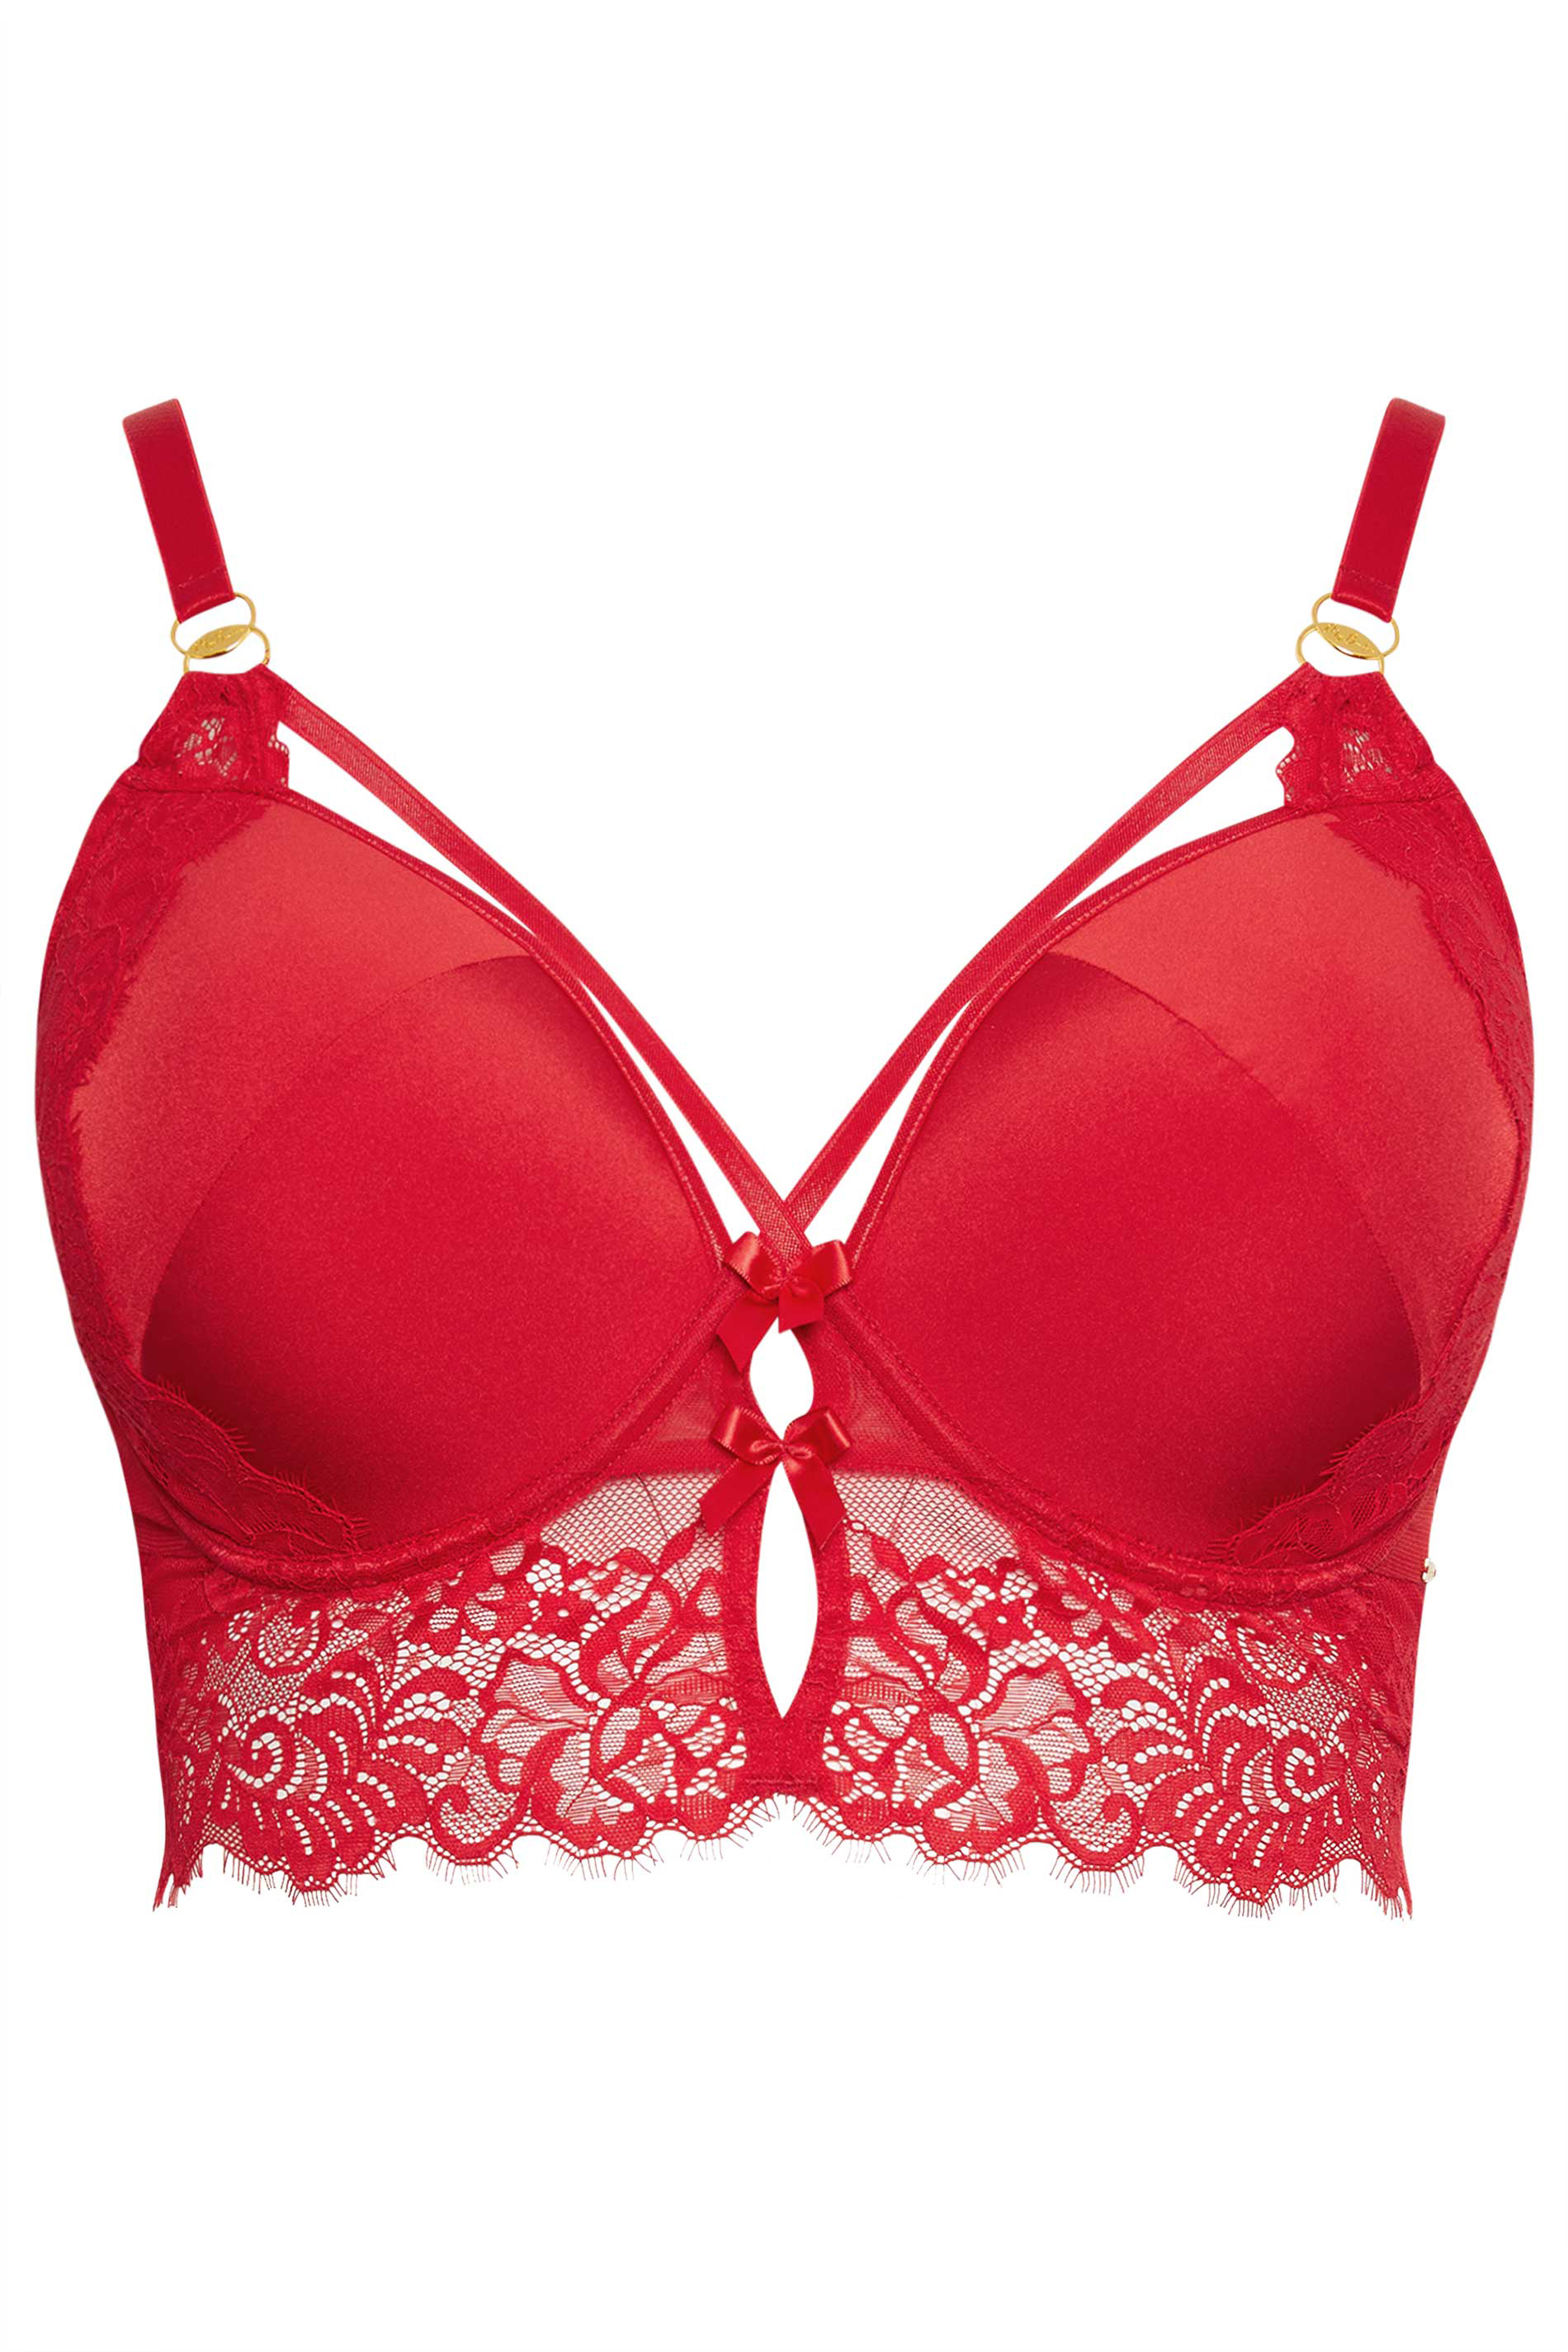 Lace Push Up Bra Padded Strappy Back Underwire Red